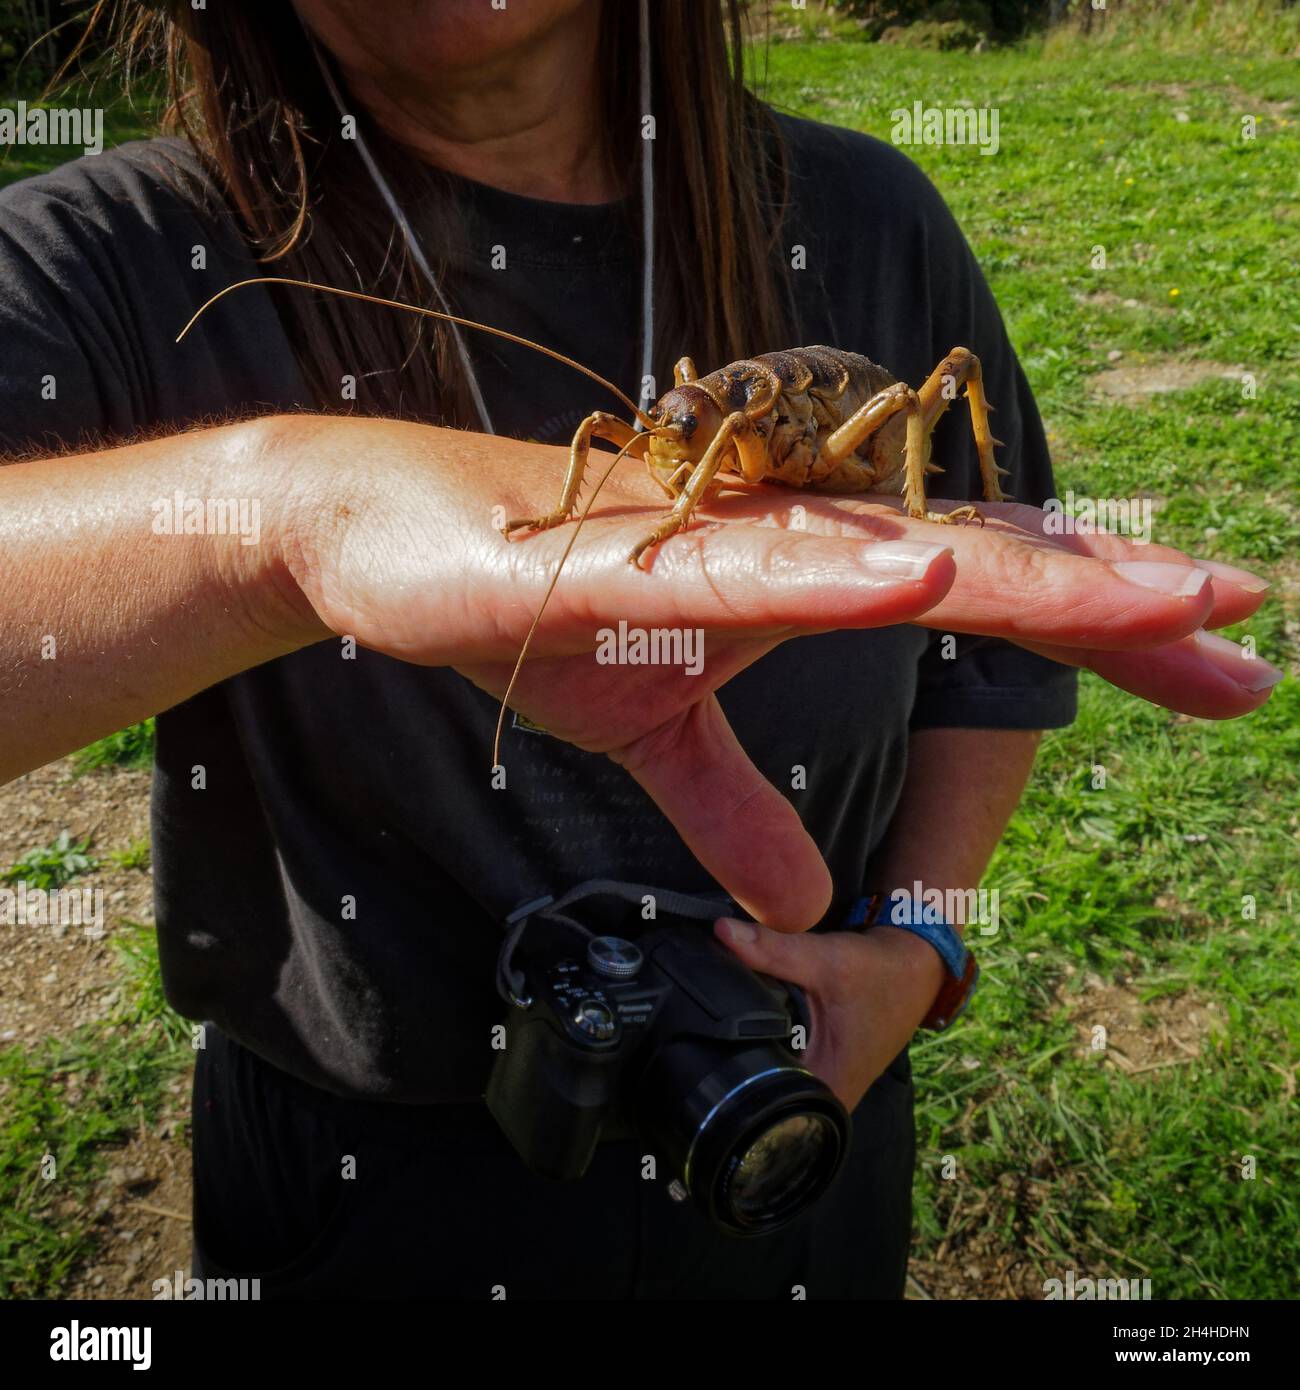 Cook Strait giant weta on a hand for scale. Stock Photo